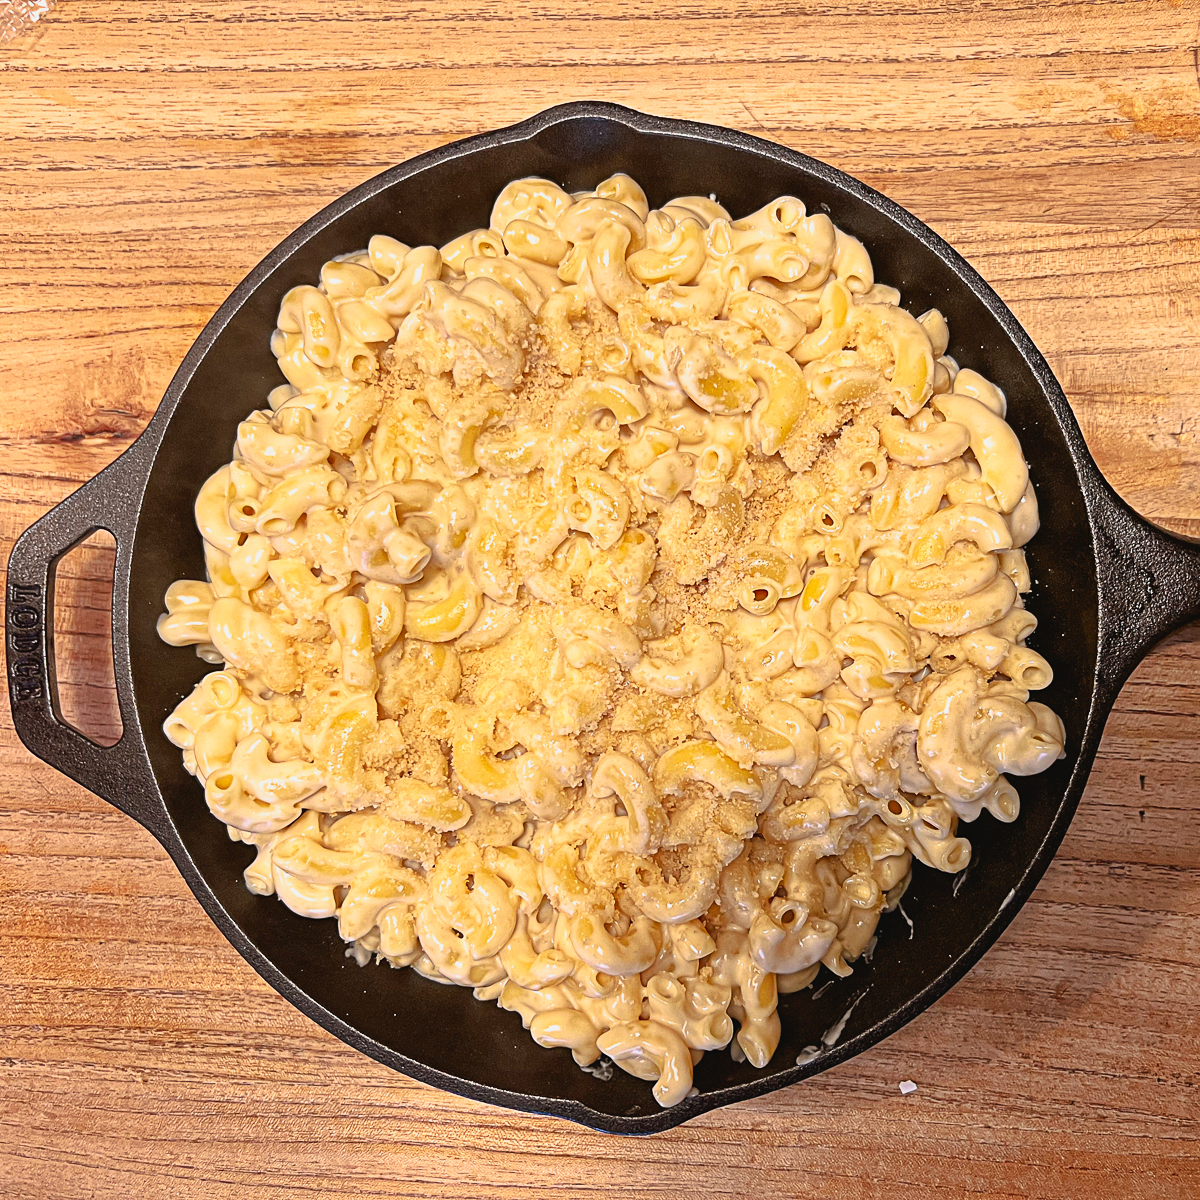 Cracker Barrel Macaroni and Cheese Copycat Recipe - step 4: pour into an oven-safe dish, top with panko crumbs and bake.